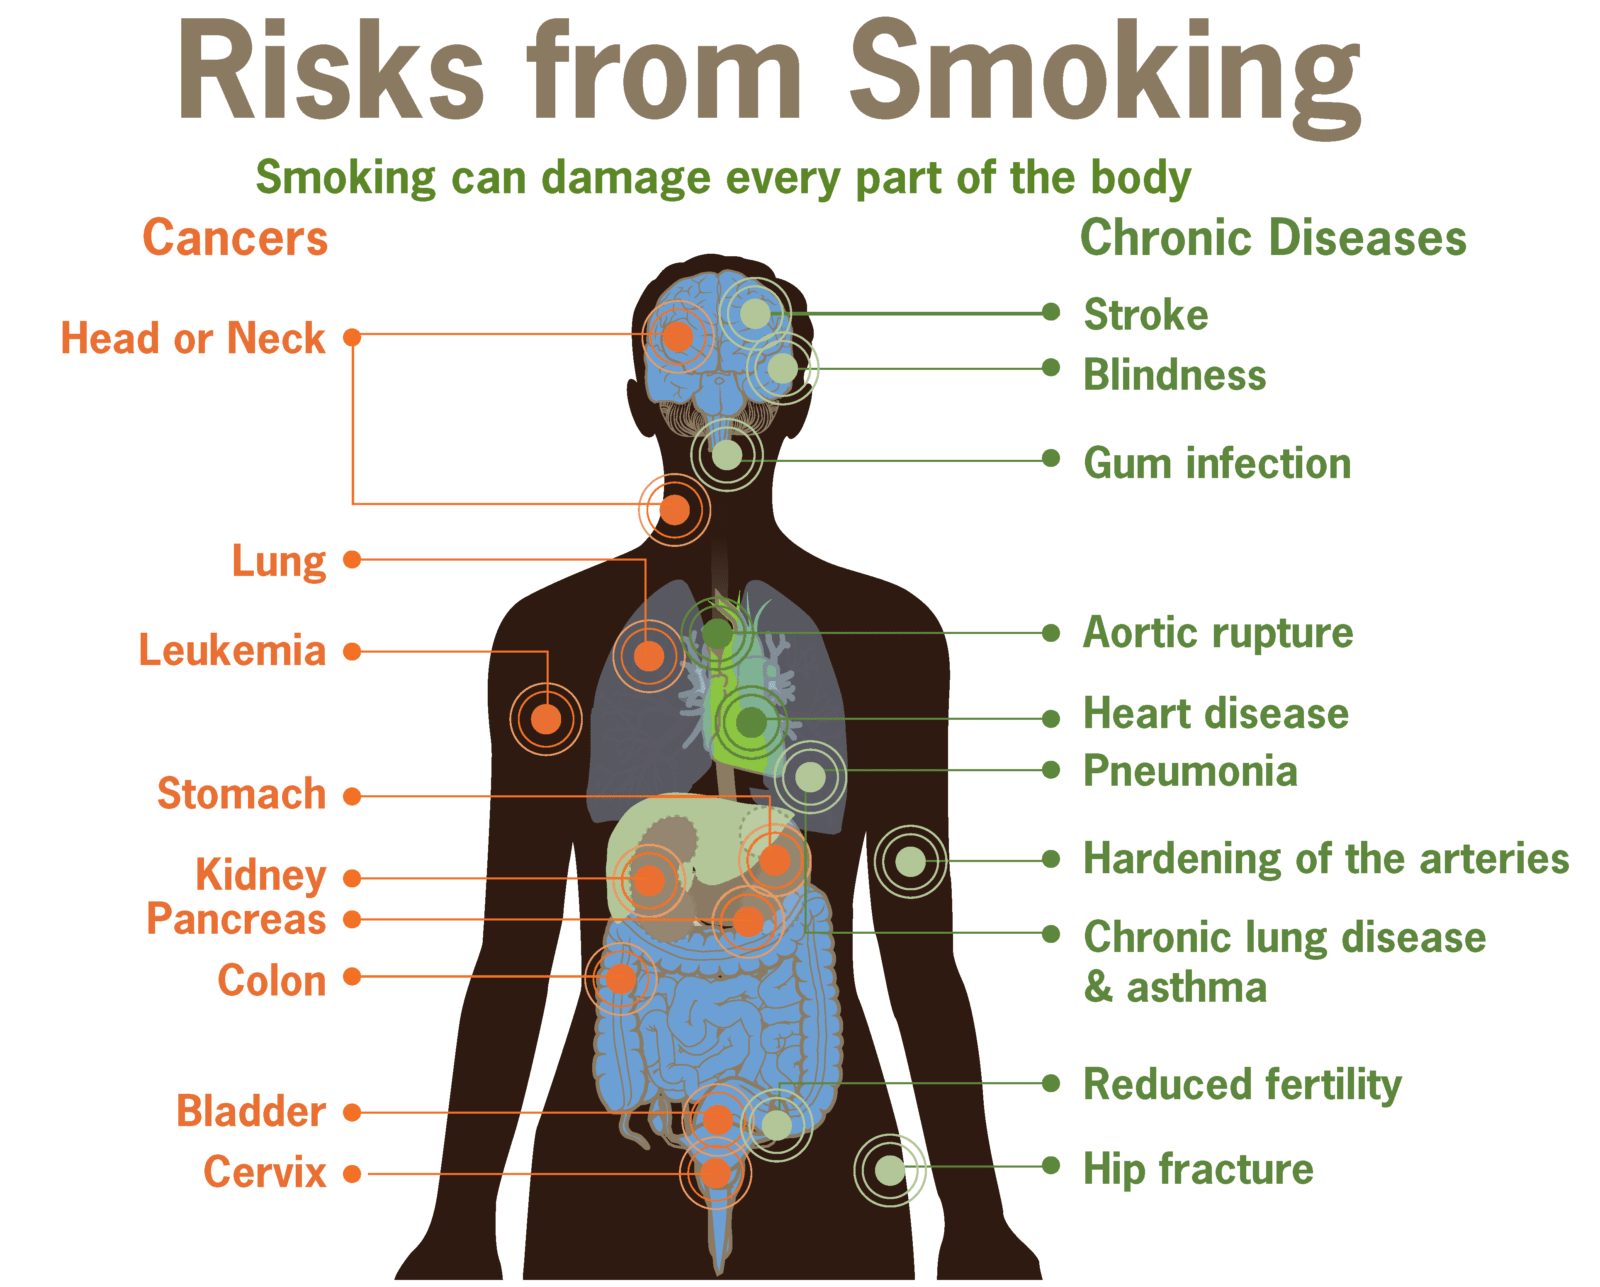 Effects of Smoking on the Body